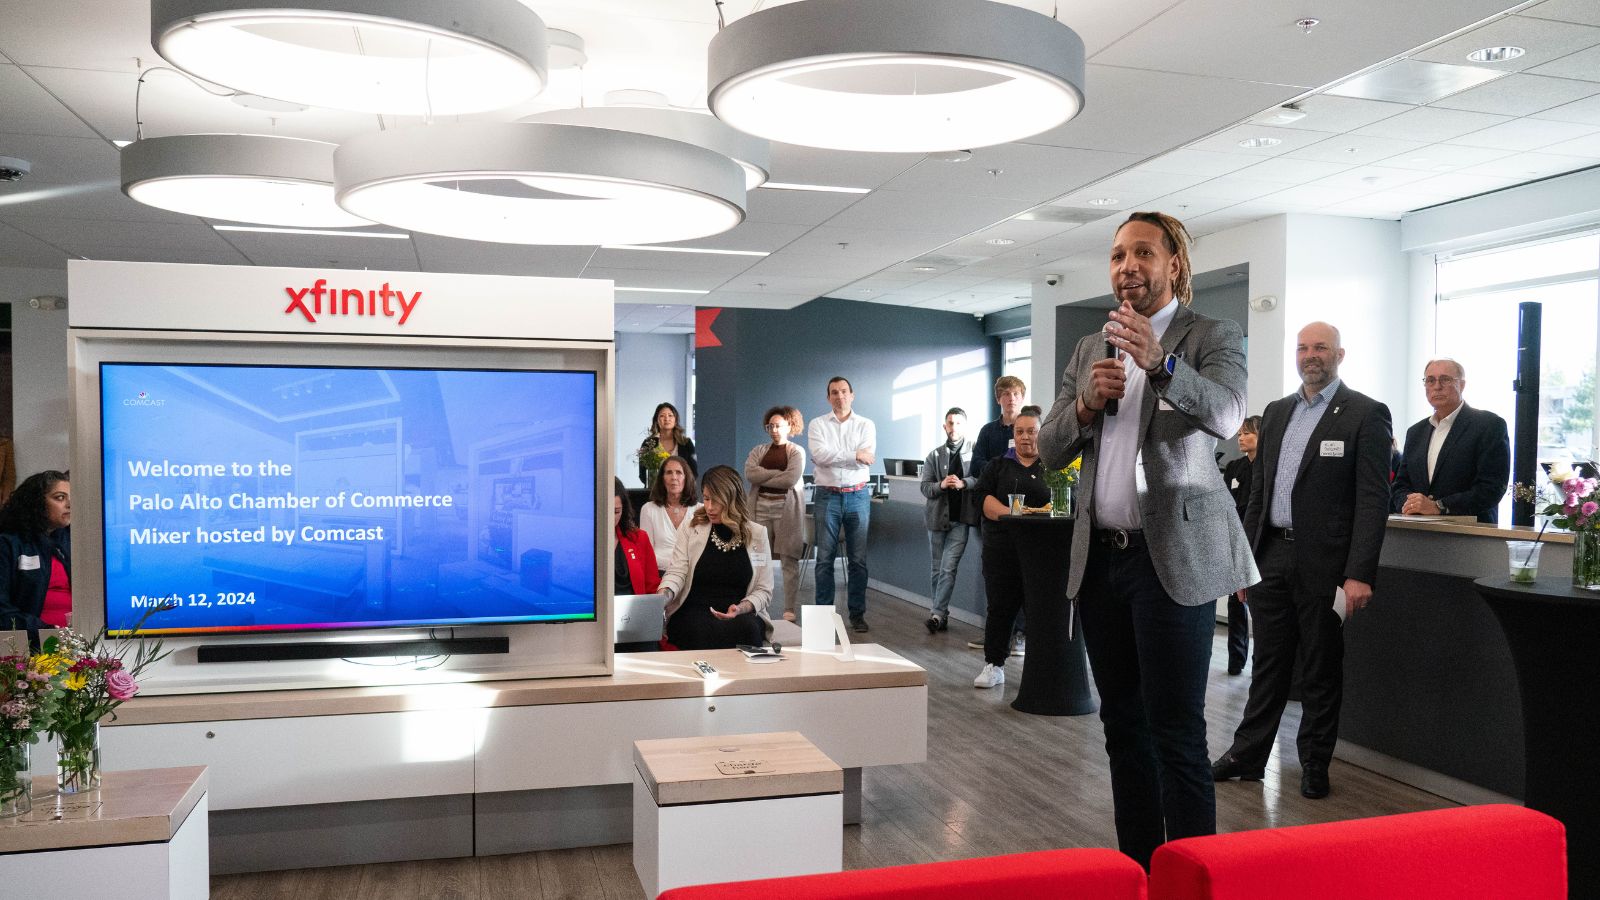 Jacob Mitchell speaks at Palo Alto Chamber of Commerce Mixer hosted by Comcast at local Xfinity store